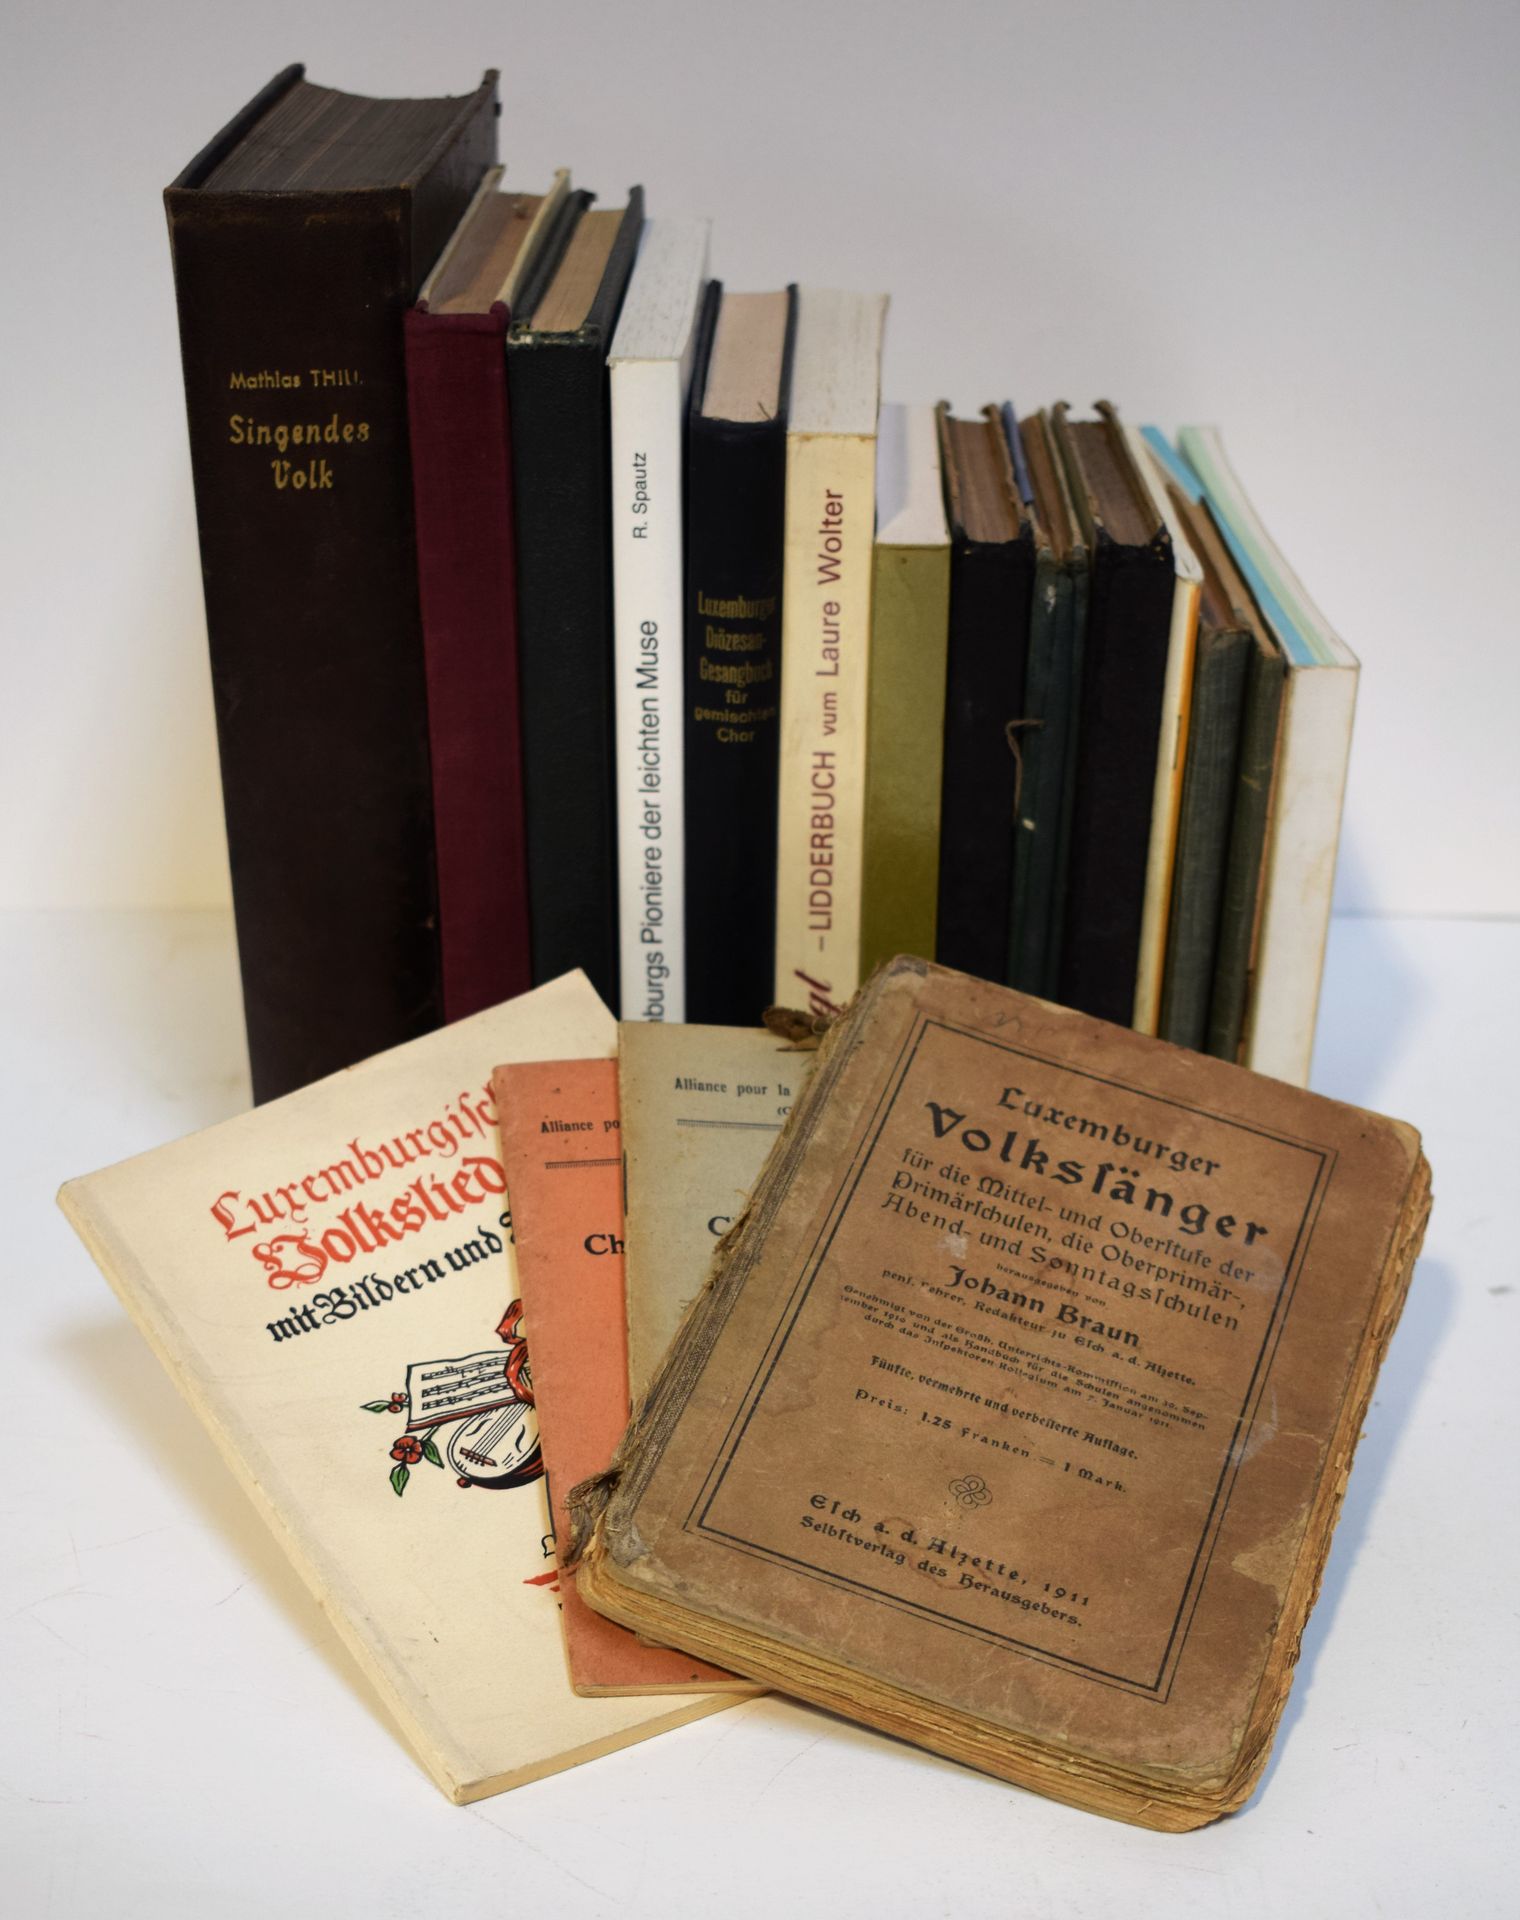 Null (Song) Set of 19 books from 1911 to the 50s on Luxembourg music.